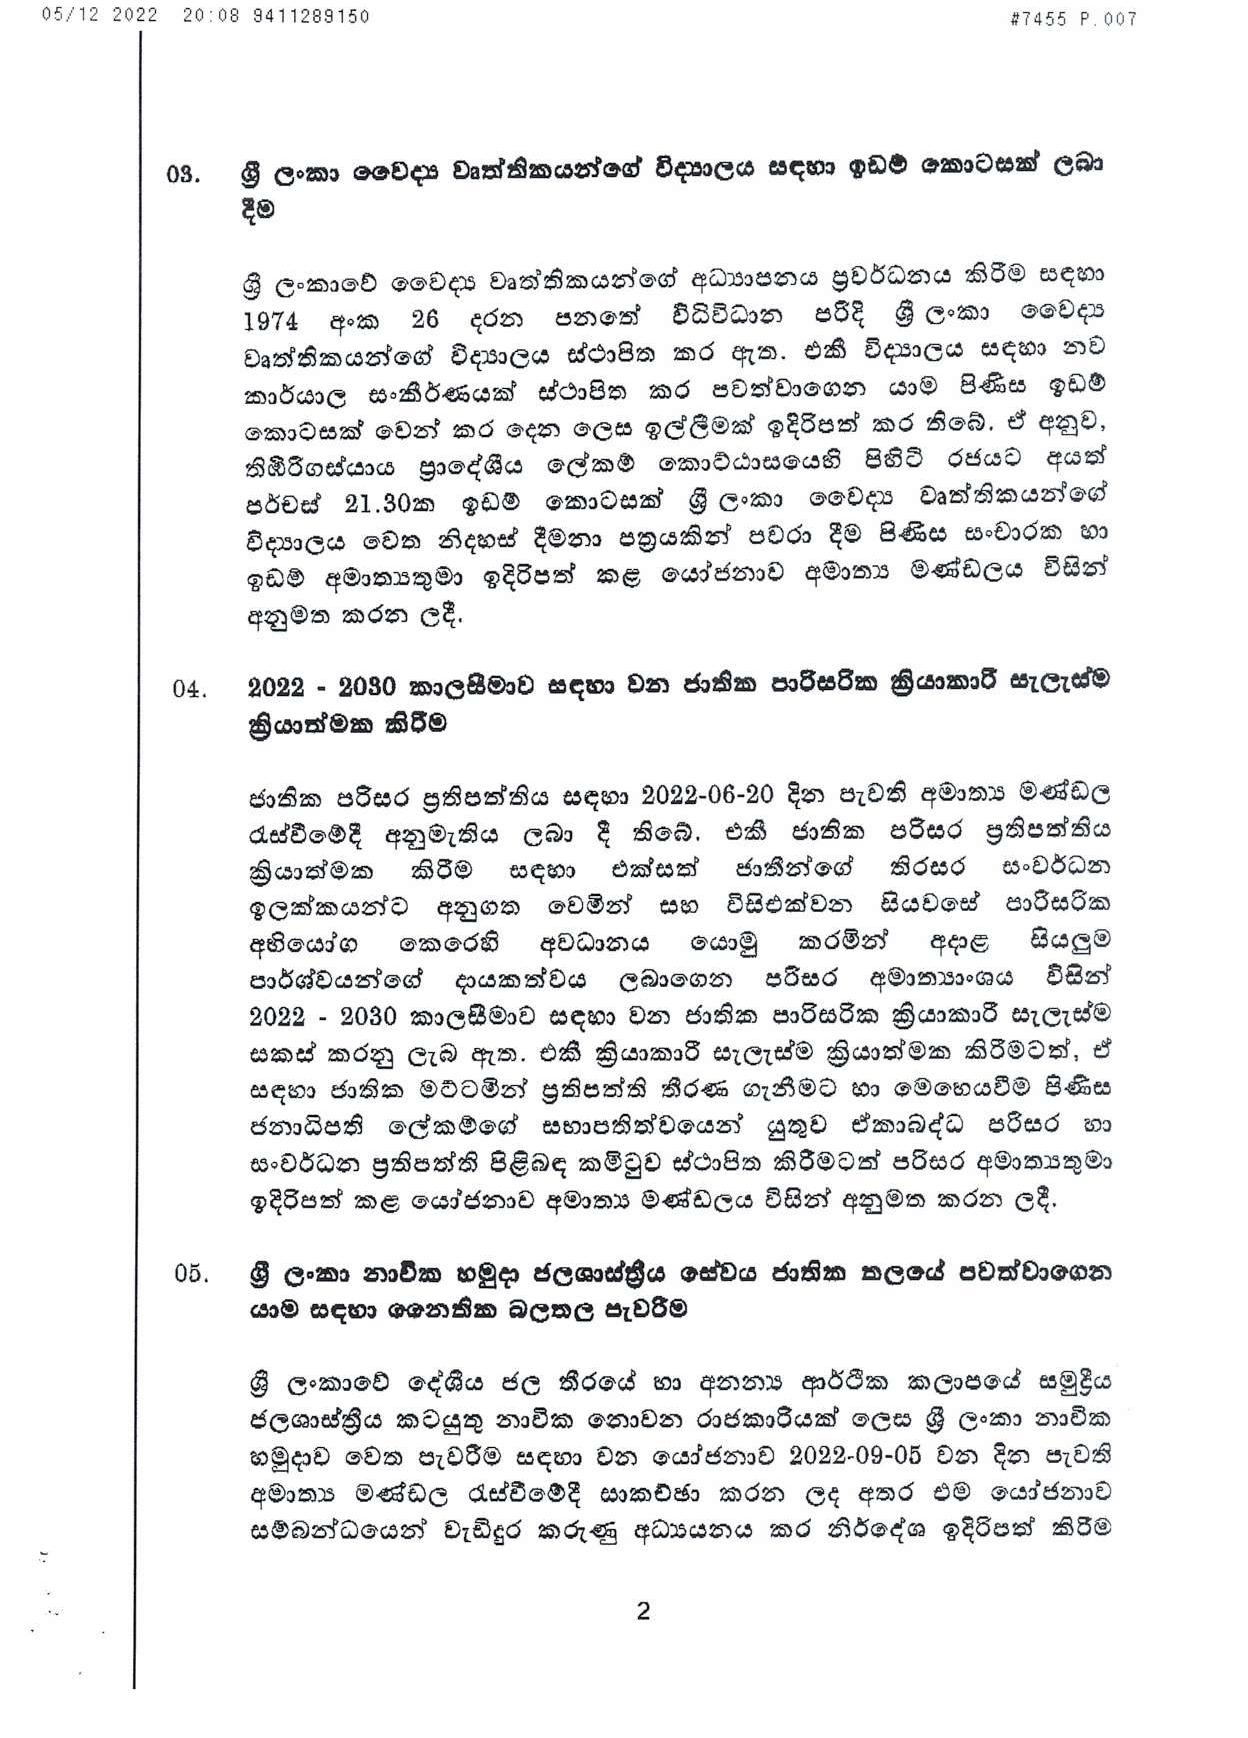 Cabinet Decisions on 05.12.2022 page 002